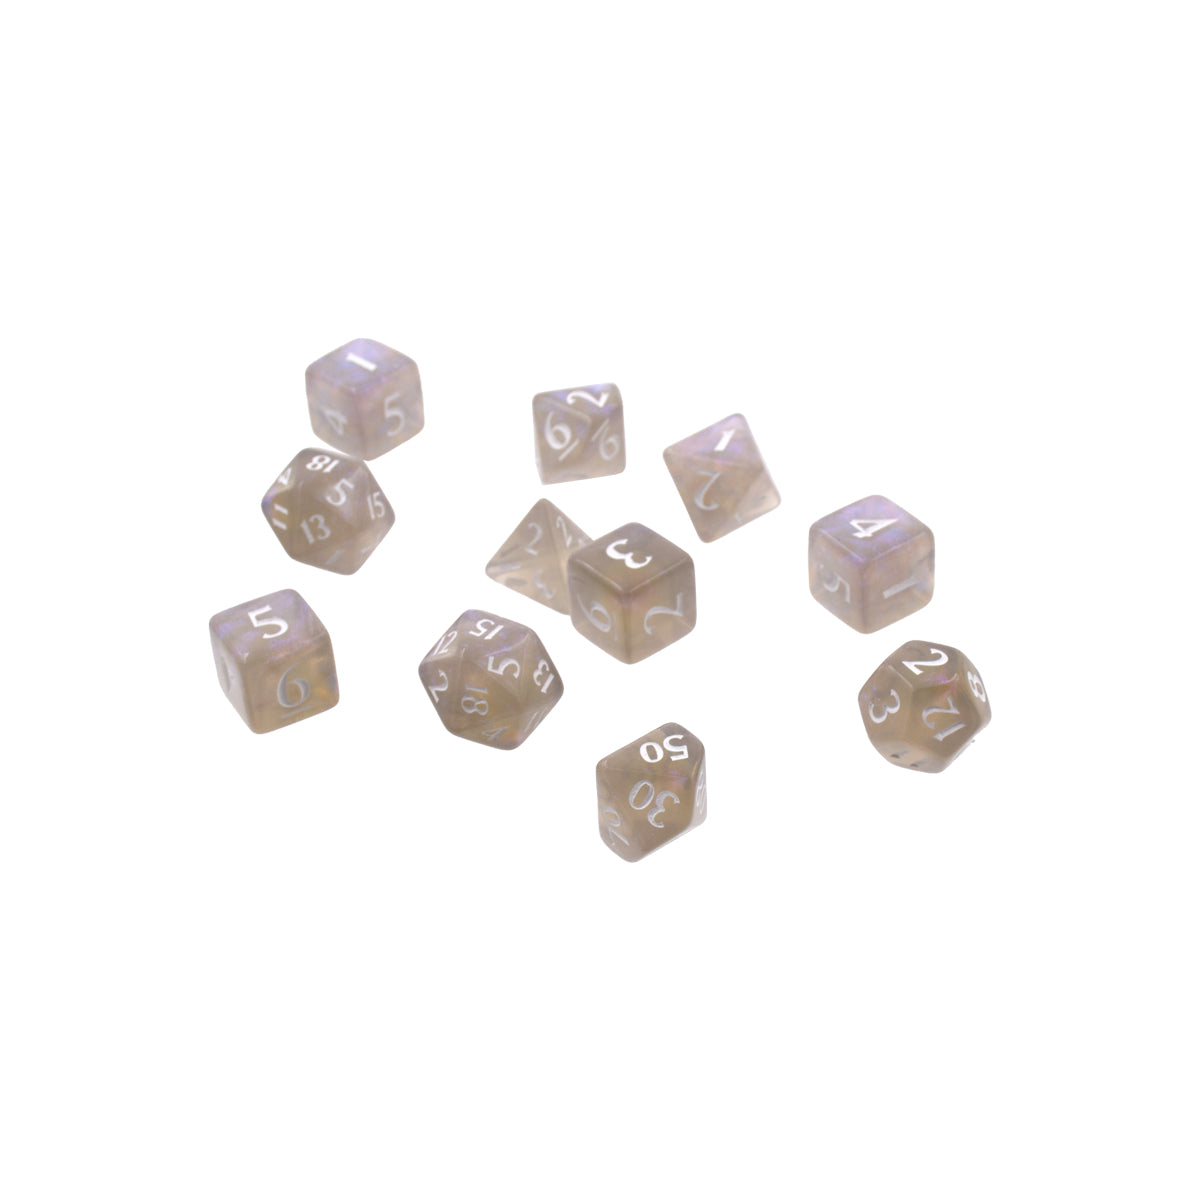 Eclipse Dice Set - 11pc | Mothership Books and Games TX